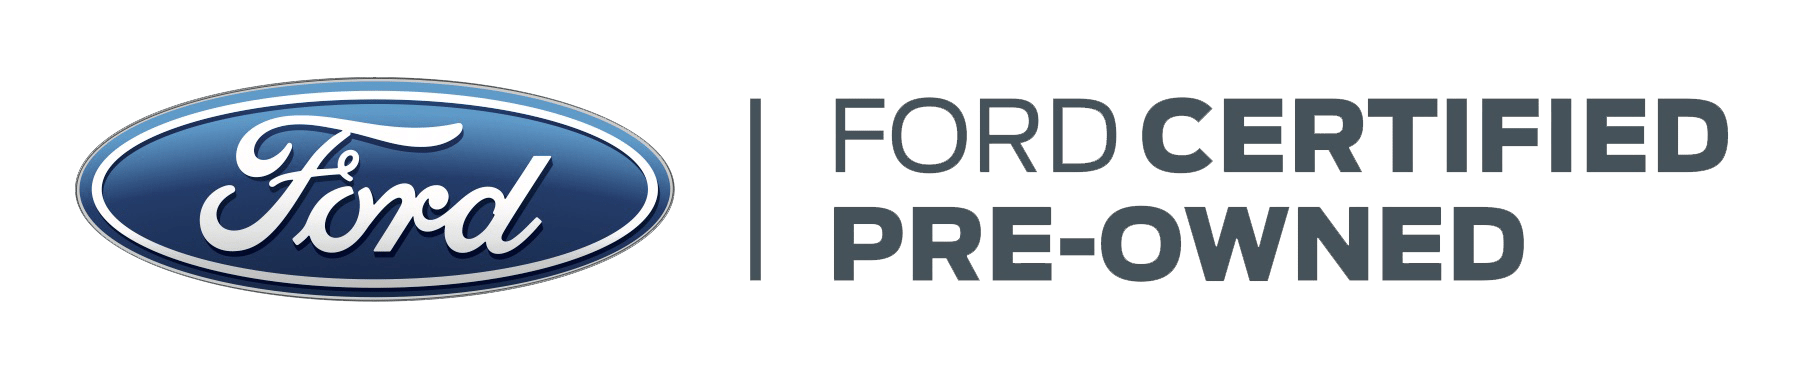 Ford Certified Pre-Owned Program image